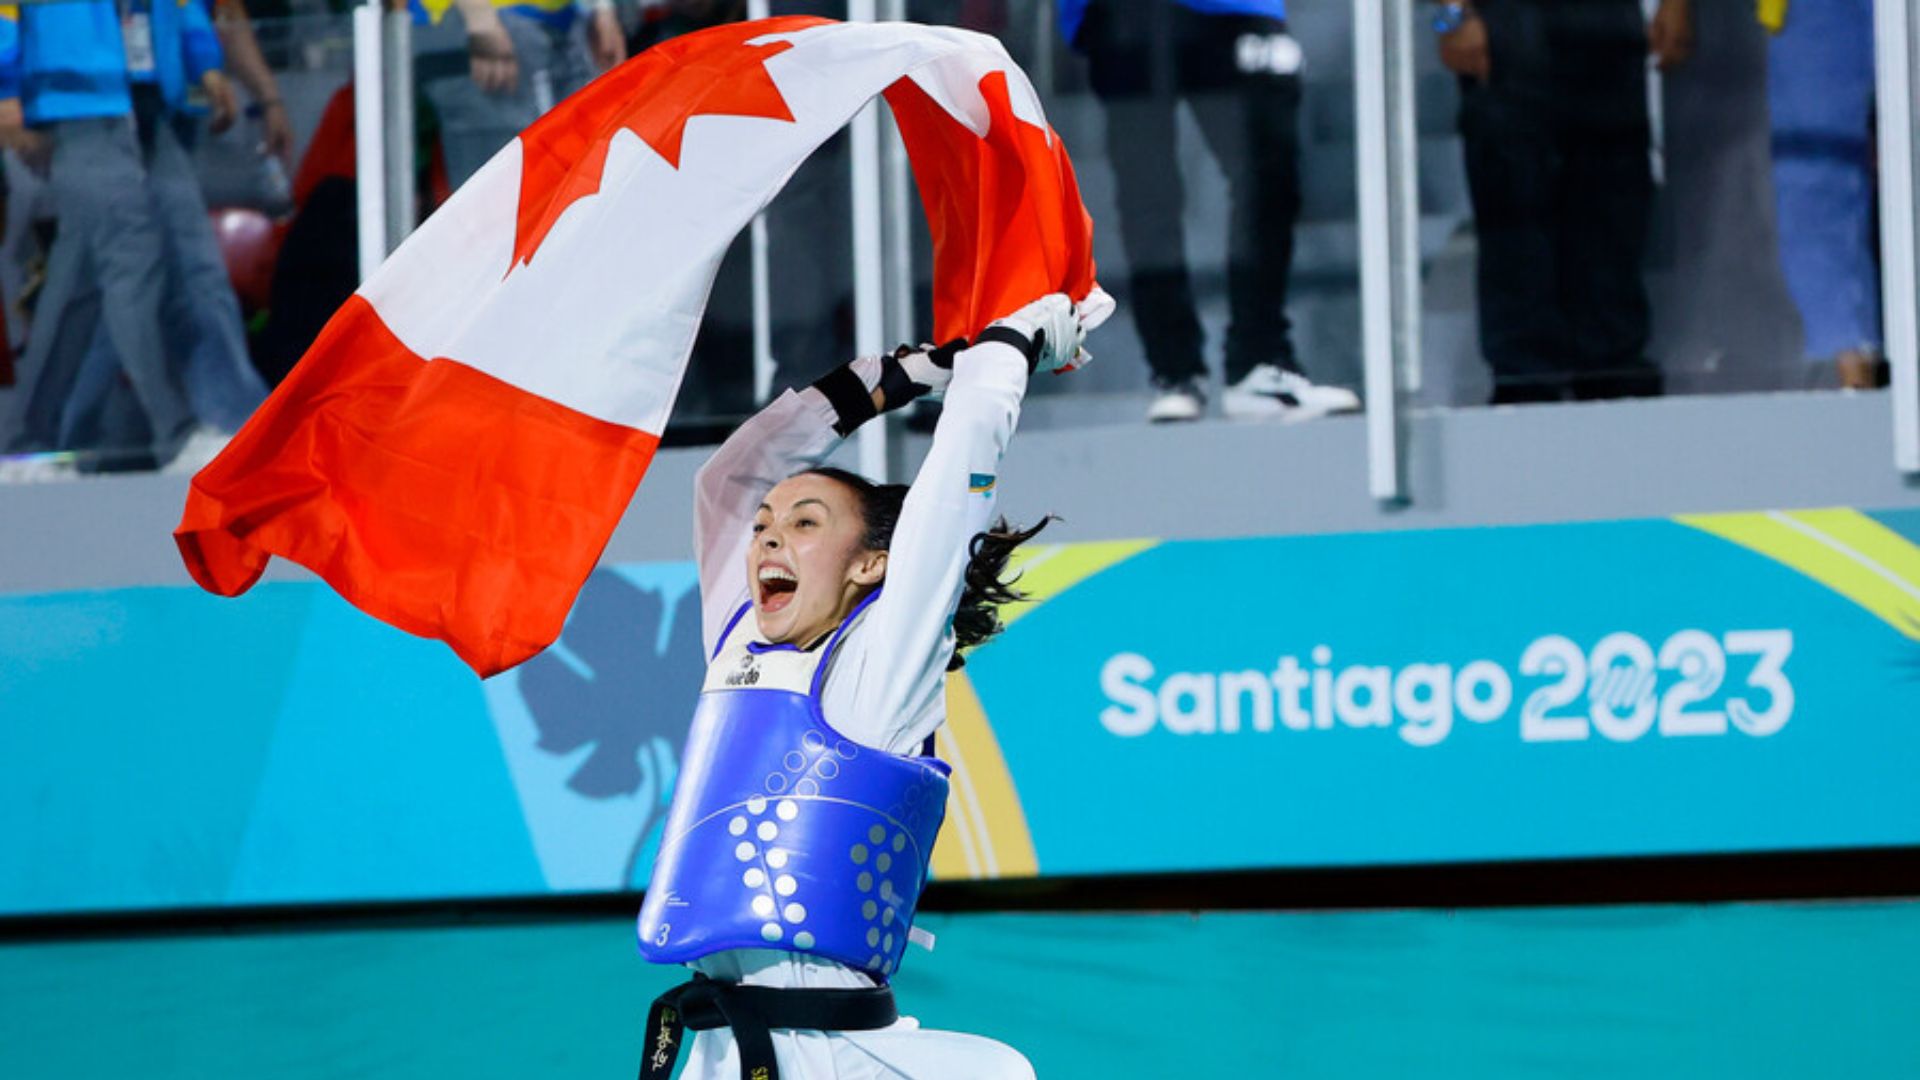 Canada, United States, and Mexico wins gold medals in taekwondo